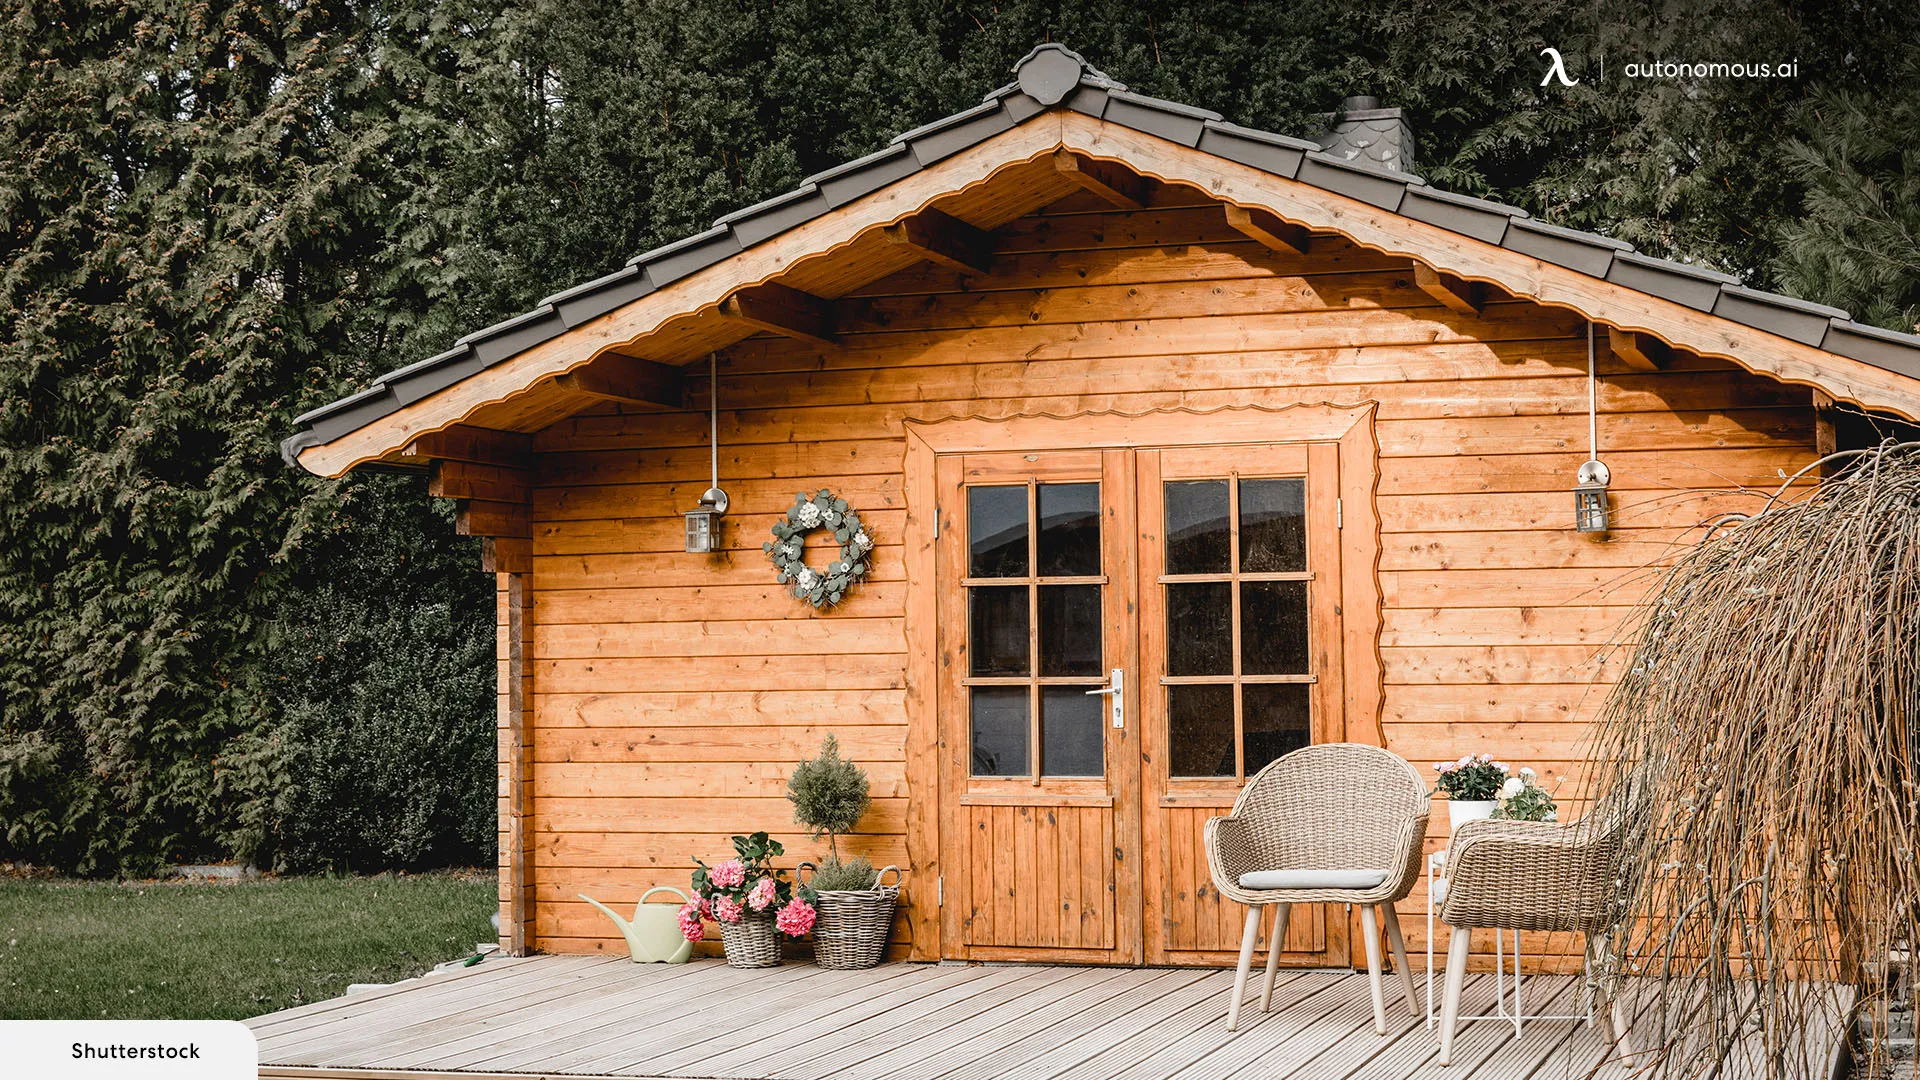 What to Look Out for When Buying a Large Storage Shed?